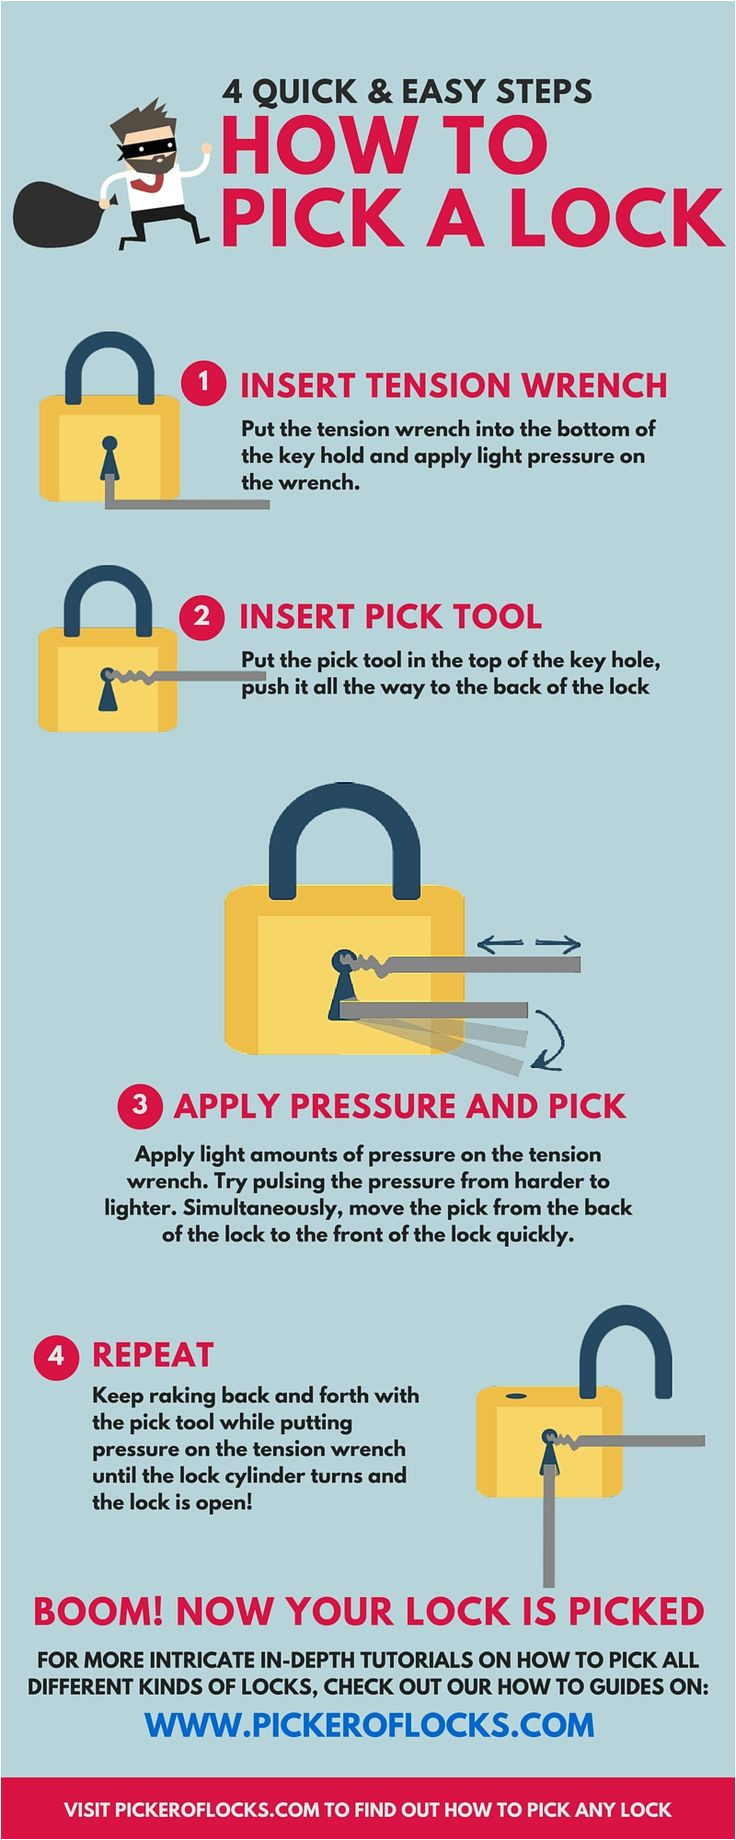 this is our quick and easy lock picking infographic if you want to learn the more in depth methods and techniques on lock picking